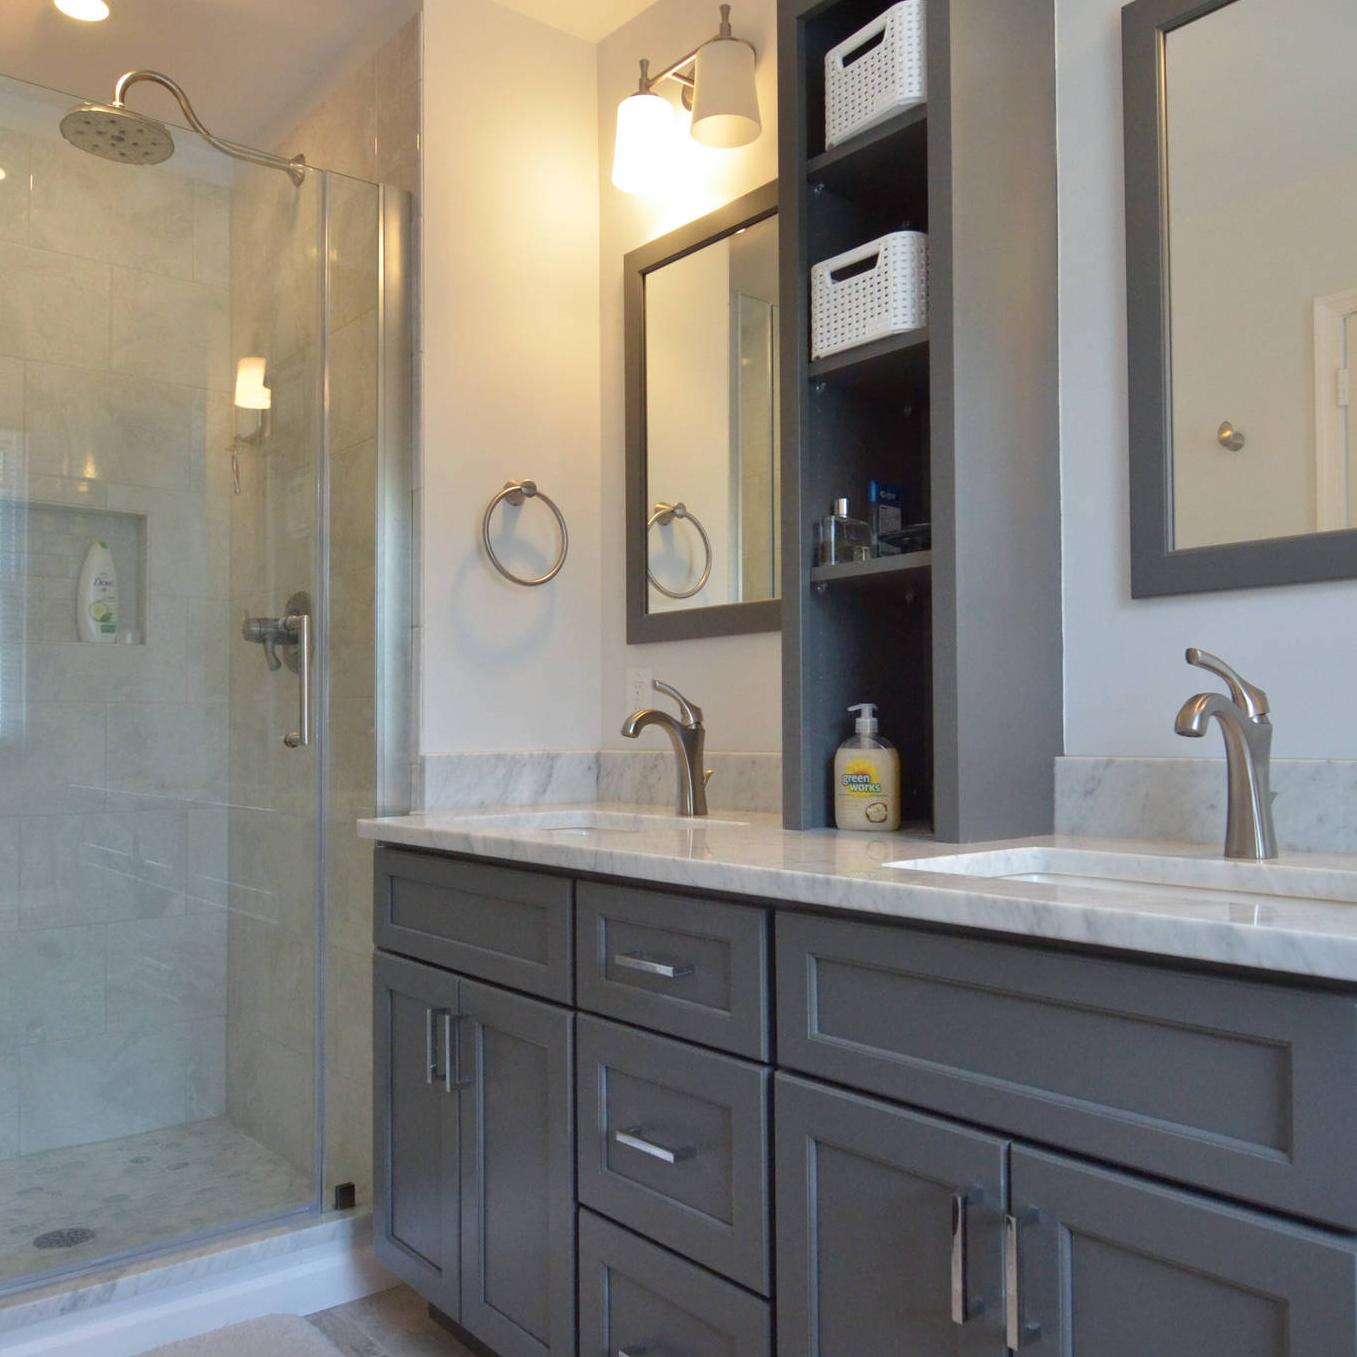 Bathroom Remodeling Of Vanity Installation  In Indianapolis IN 